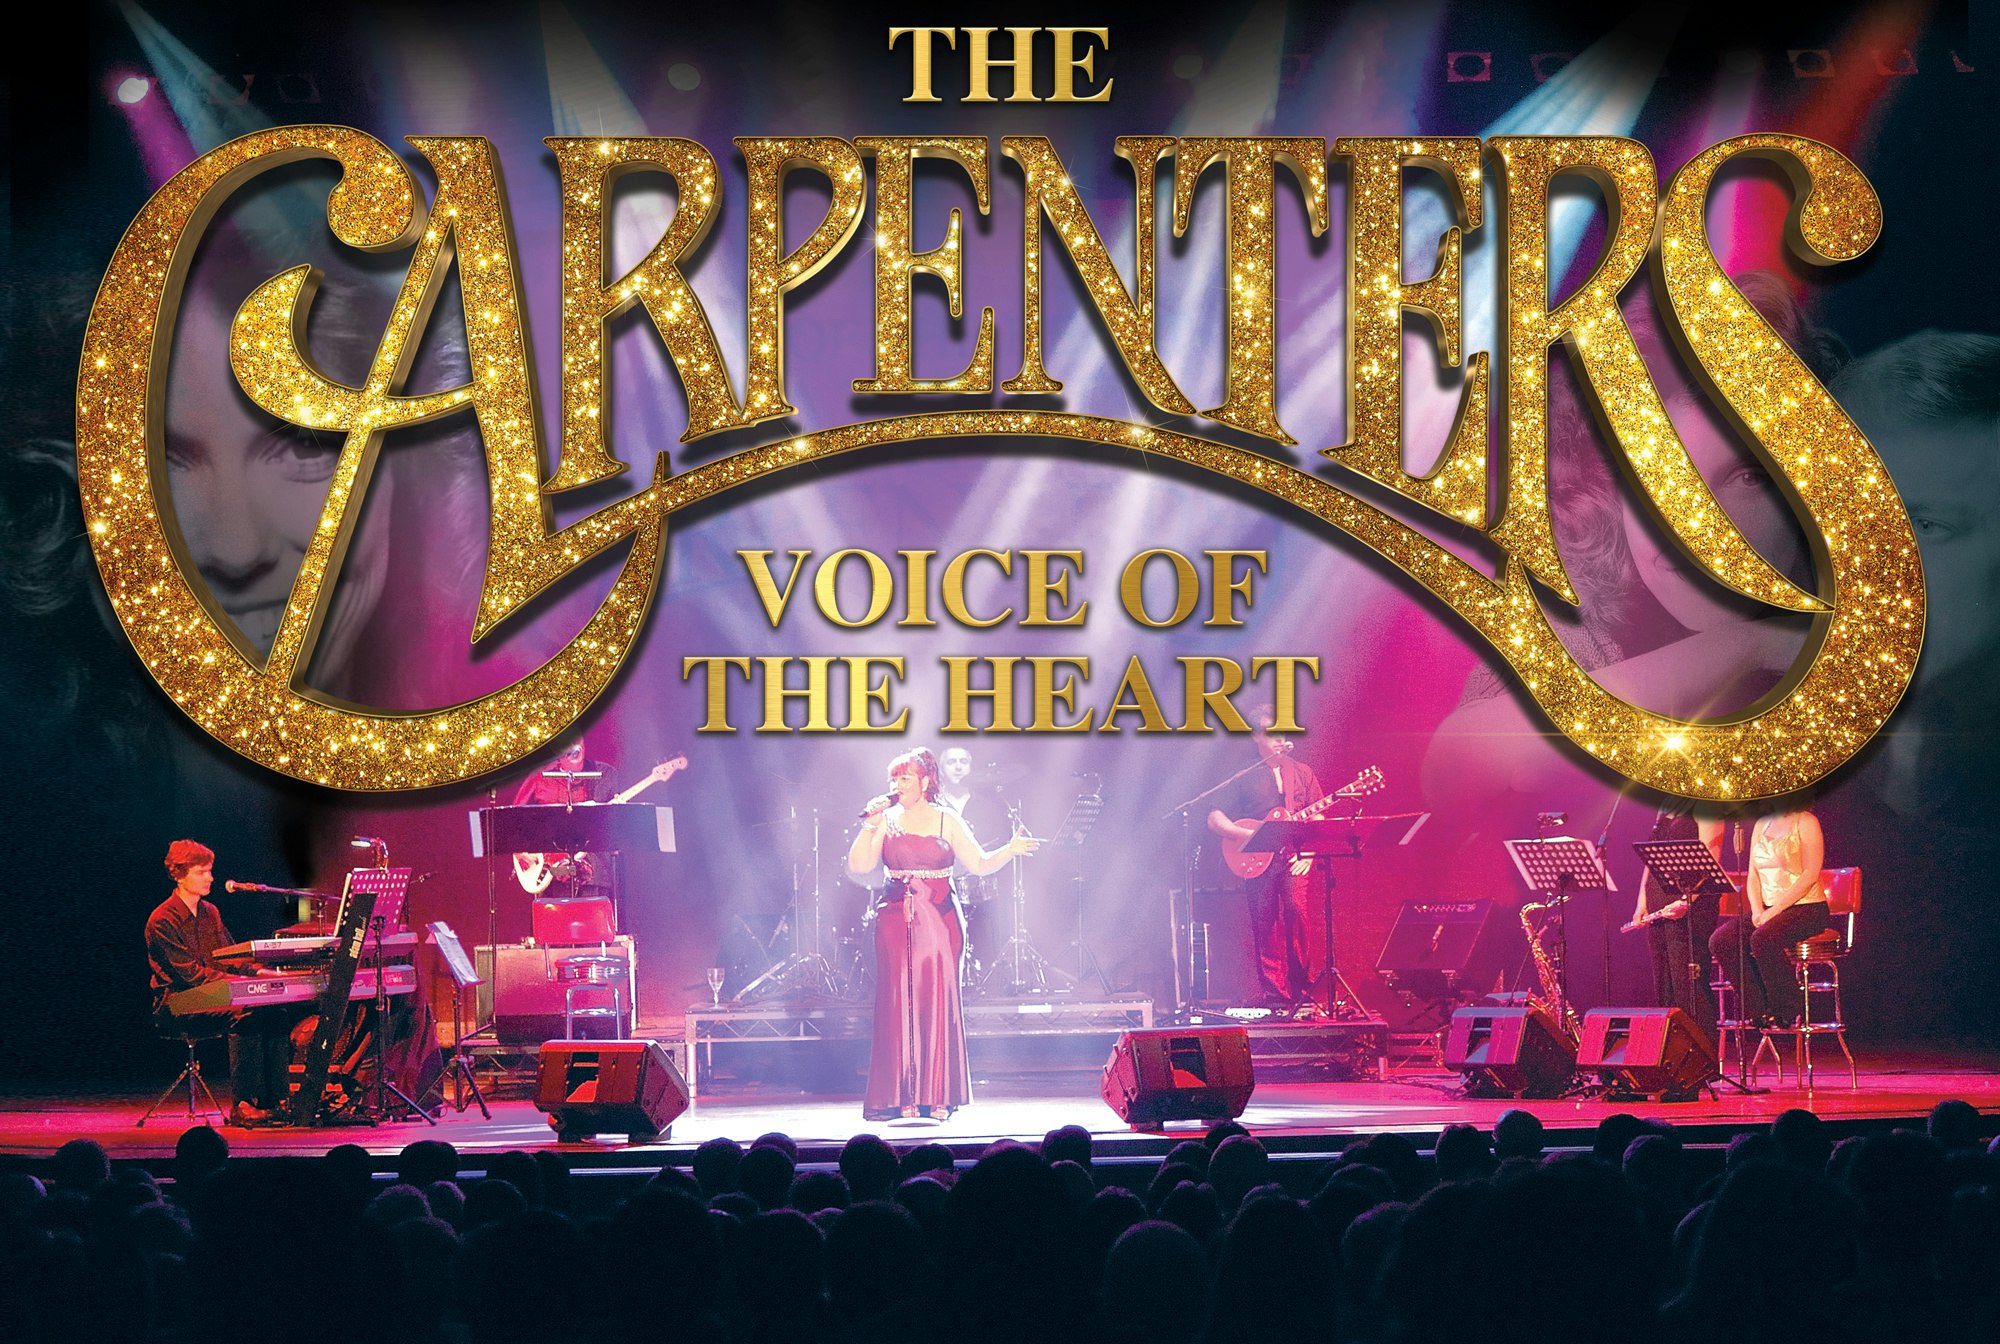 THE CARPENTERS STORY UK TOUR 2019 PROMOTIONAL FLYER!! 